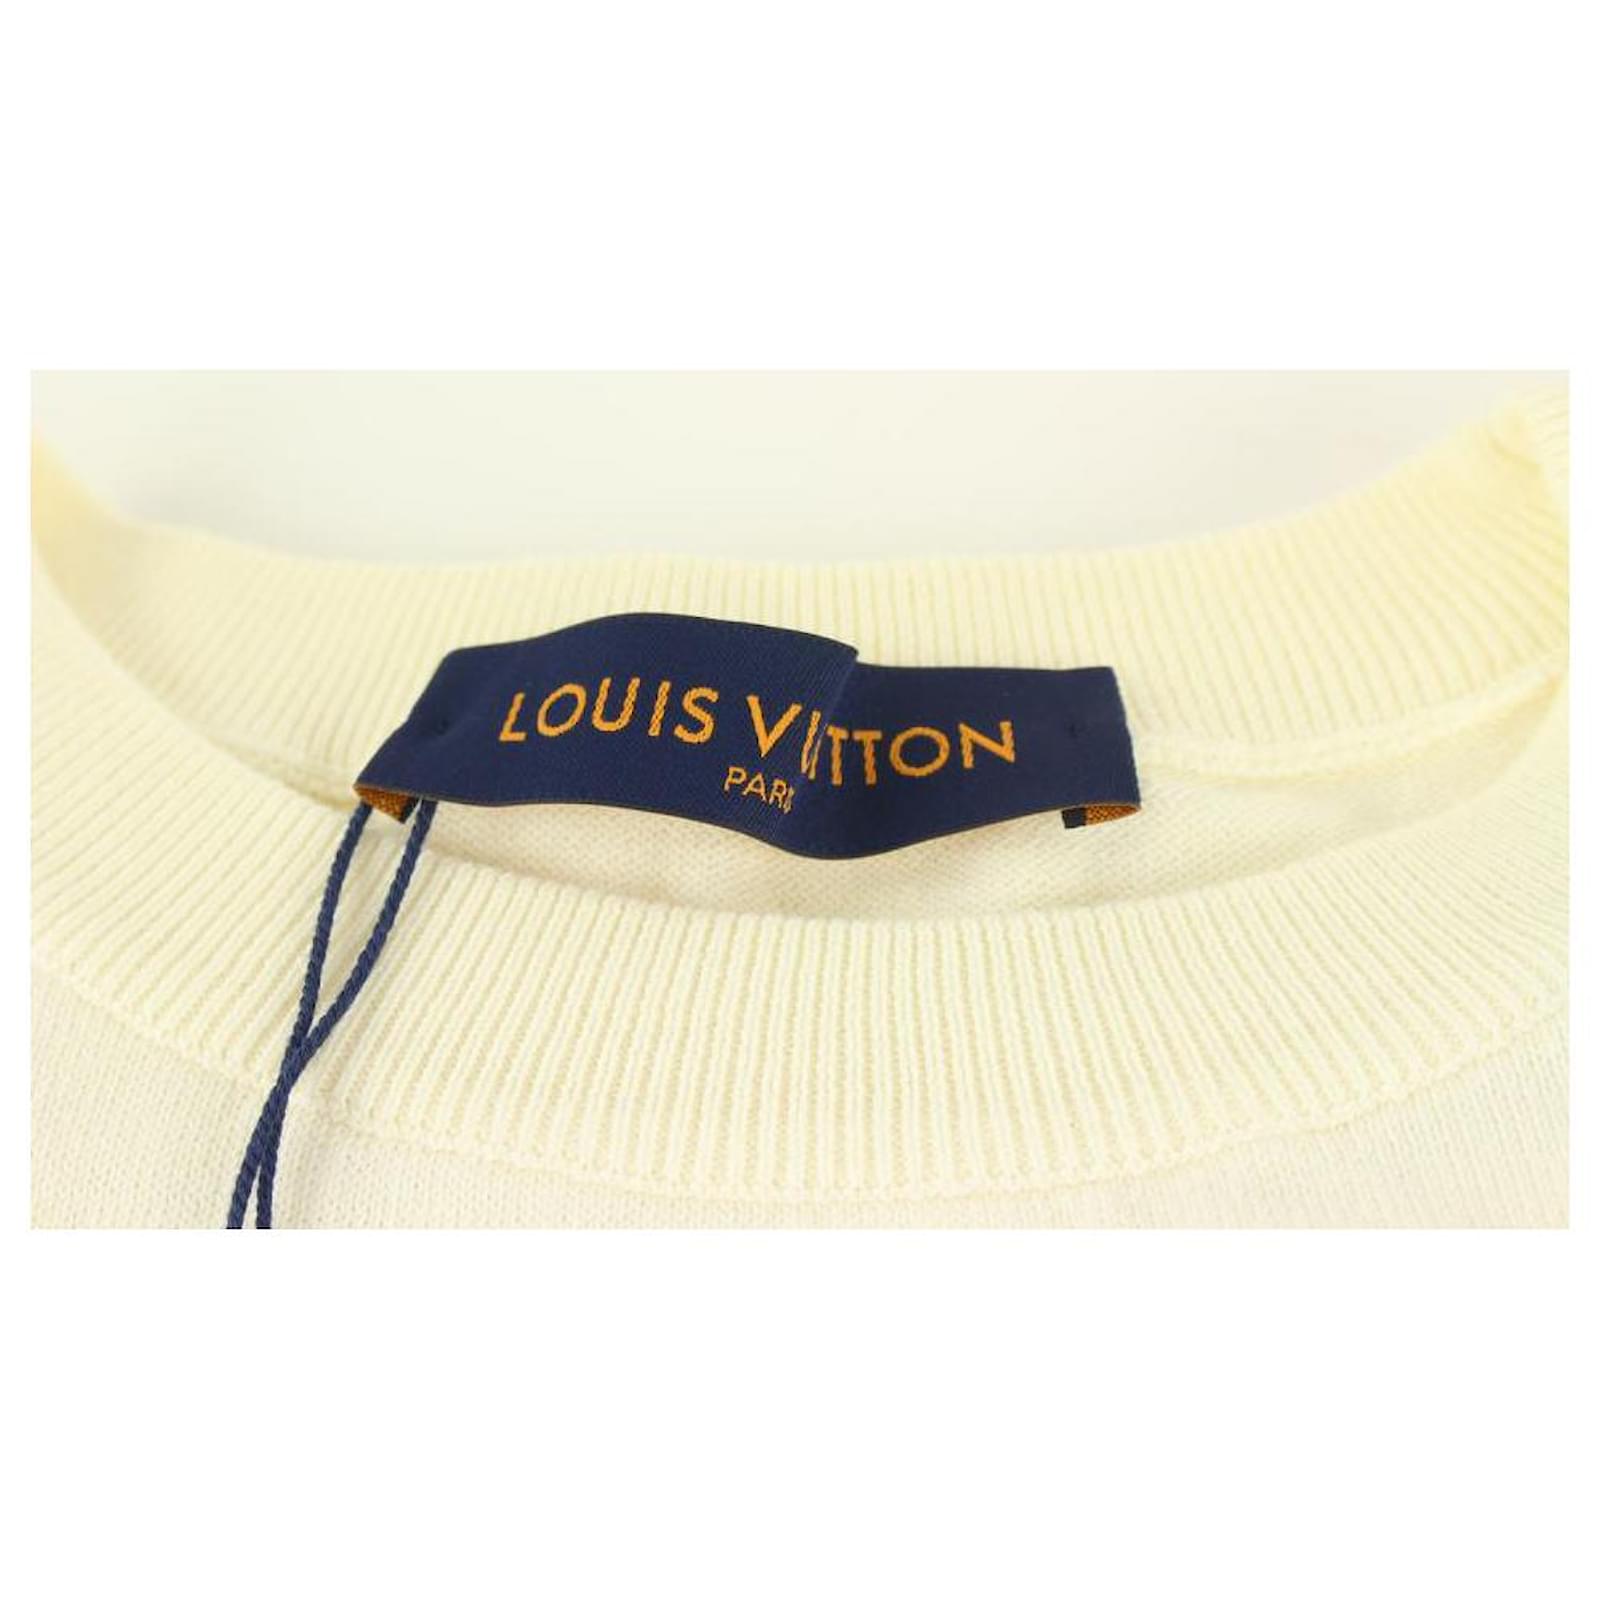 Louis Vuitton Virgil Cotton Knit Toy Sweater - clothing & accessories - by  owner - apparel sale - craigslist